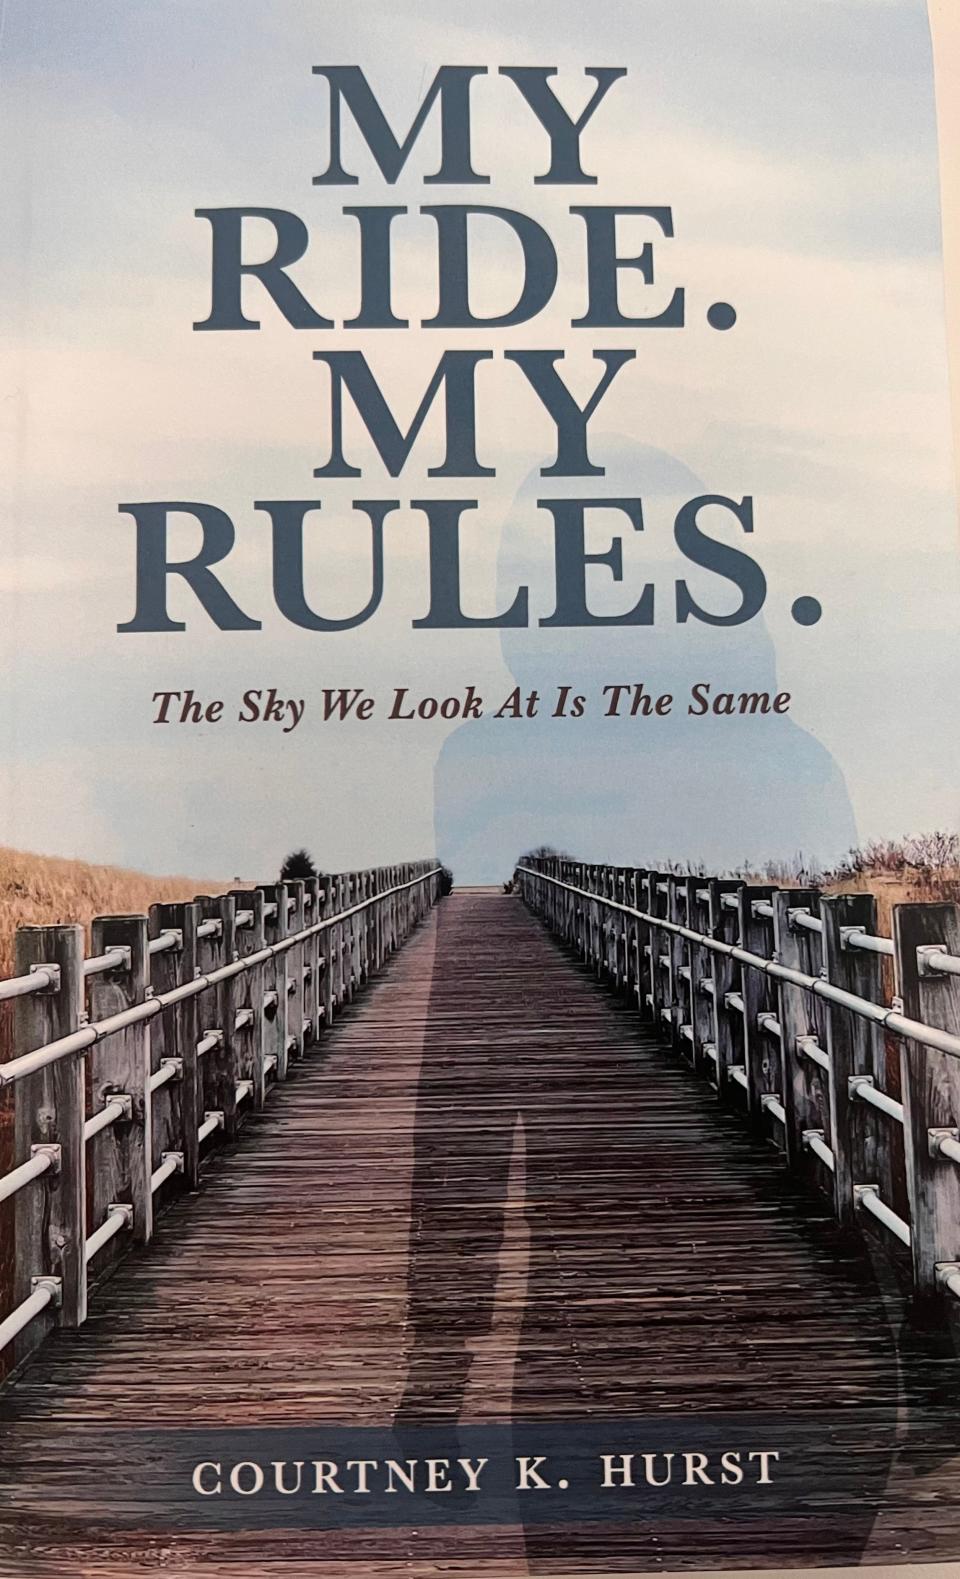 Courtney Hurst's book "My Ride. My Rules: The Sky We Look at is The Same."